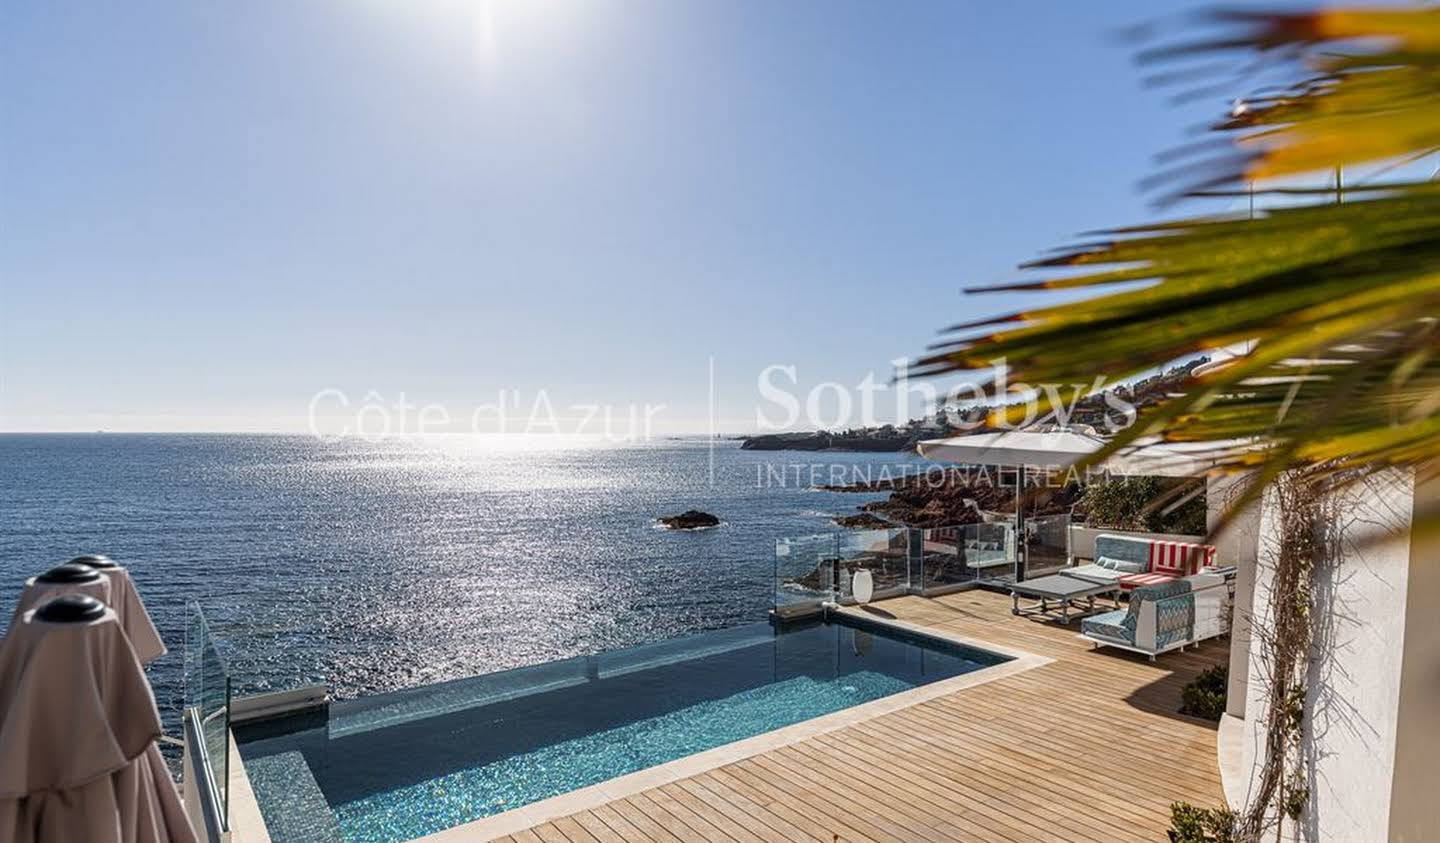 Seaside villa with pool Antheor